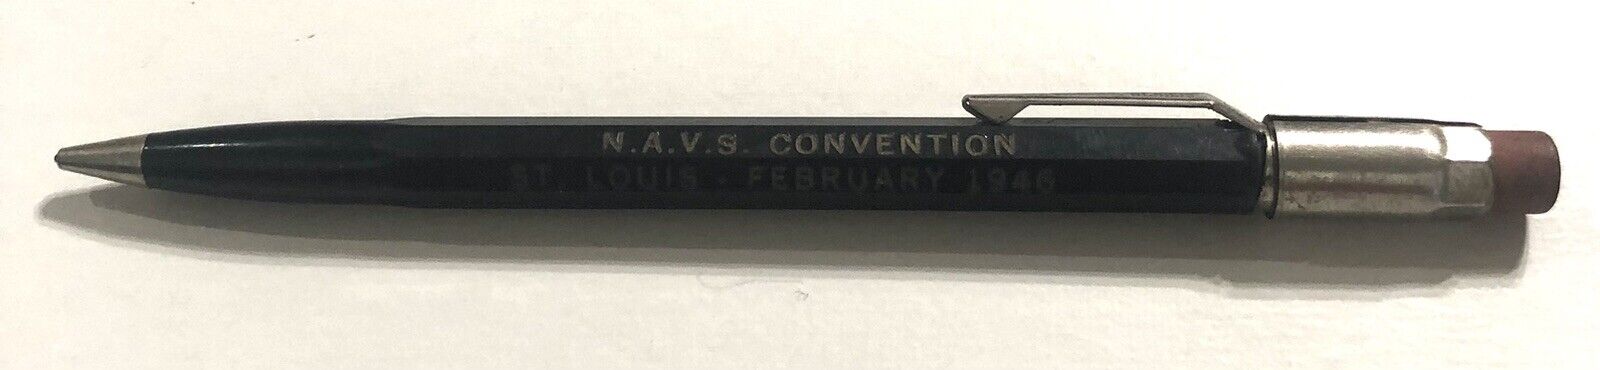 Vintage N.A.V.S. Convention St. Louis Feb. 1946 Mechanical Advertising Pencil